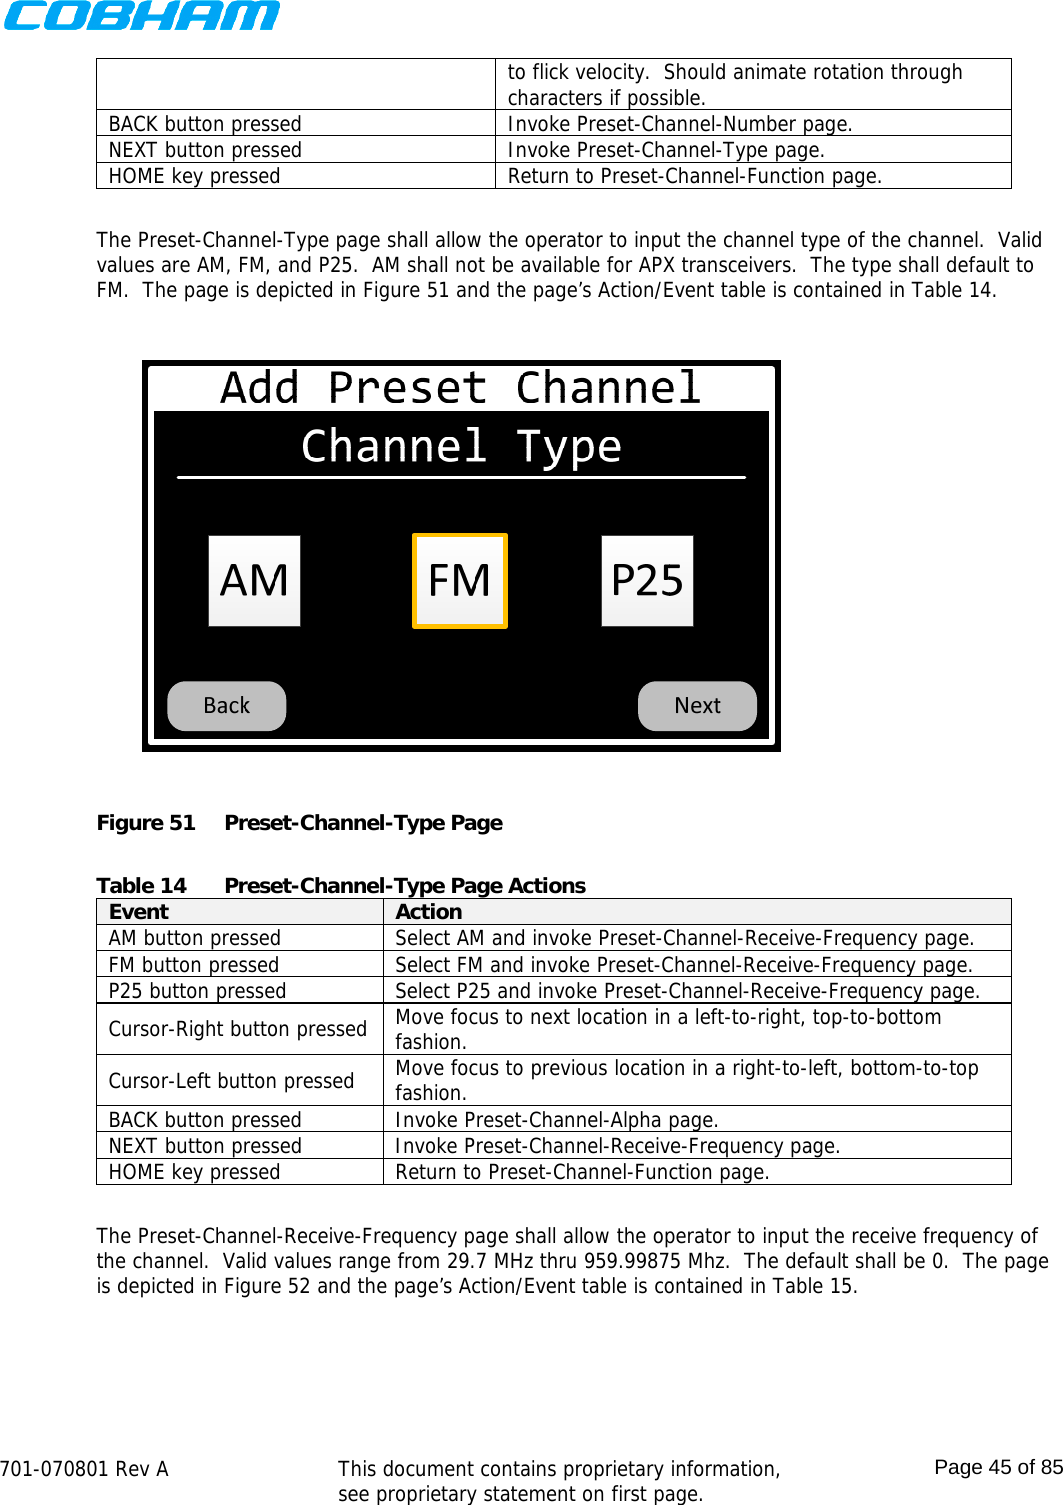    701-070801 Rev A   This document contains proprietary information, see proprietary statement on first page.  Page 45 of 85  to flick velocity.  Should animate rotation through characters if possible. BACK button pressed  Invoke Preset-Channel-Number page. NEXT button pressed  Invoke Preset-Channel-Type page. HOME key pressed  Return to Preset-Channel-Function page.  The Preset-Channel-Type page shall allow the operator to input the channel type of the channel.  Valid values are AM, FM, and P25.  AM shall not be available for APX transceivers.  The type shall default to FM.  The page is depicted in Figure 51 and the page’s Action/Event table is contained in Table 14.  Figure 51  Preset-Channel-Type Page  Table 14  Preset-Channel-Type Page Actions Event  Action AM button pressed  Select AM and invoke Preset-Channel-Receive-Frequency page. FM button pressed  Select FM and invoke Preset-Channel-Receive-Frequency page. P25 button pressed  Select P25 and invoke Preset-Channel-Receive-Frequency page. Cursor-Right button pressed  Move focus to next location in a left-to-right, top-to-bottom fashion. Cursor-Left button pressed  Move focus to previous location in a right-to-left, bottom-to-top fashion. BACK button pressed  Invoke Preset-Channel-Alpha page. NEXT button pressed  Invoke Preset-Channel-Receive-Frequency page. HOME key pressed  Return to Preset-Channel-Function page.  The Preset-Channel-Receive-Frequency page shall allow the operator to input the receive frequency of the channel.  Valid values range from 29.7 MHz thru 959.99875 Mhz.  The default shall be 0.  The page is depicted in Figure 52 and the page’s Action/Event table is contained in Table 15. 